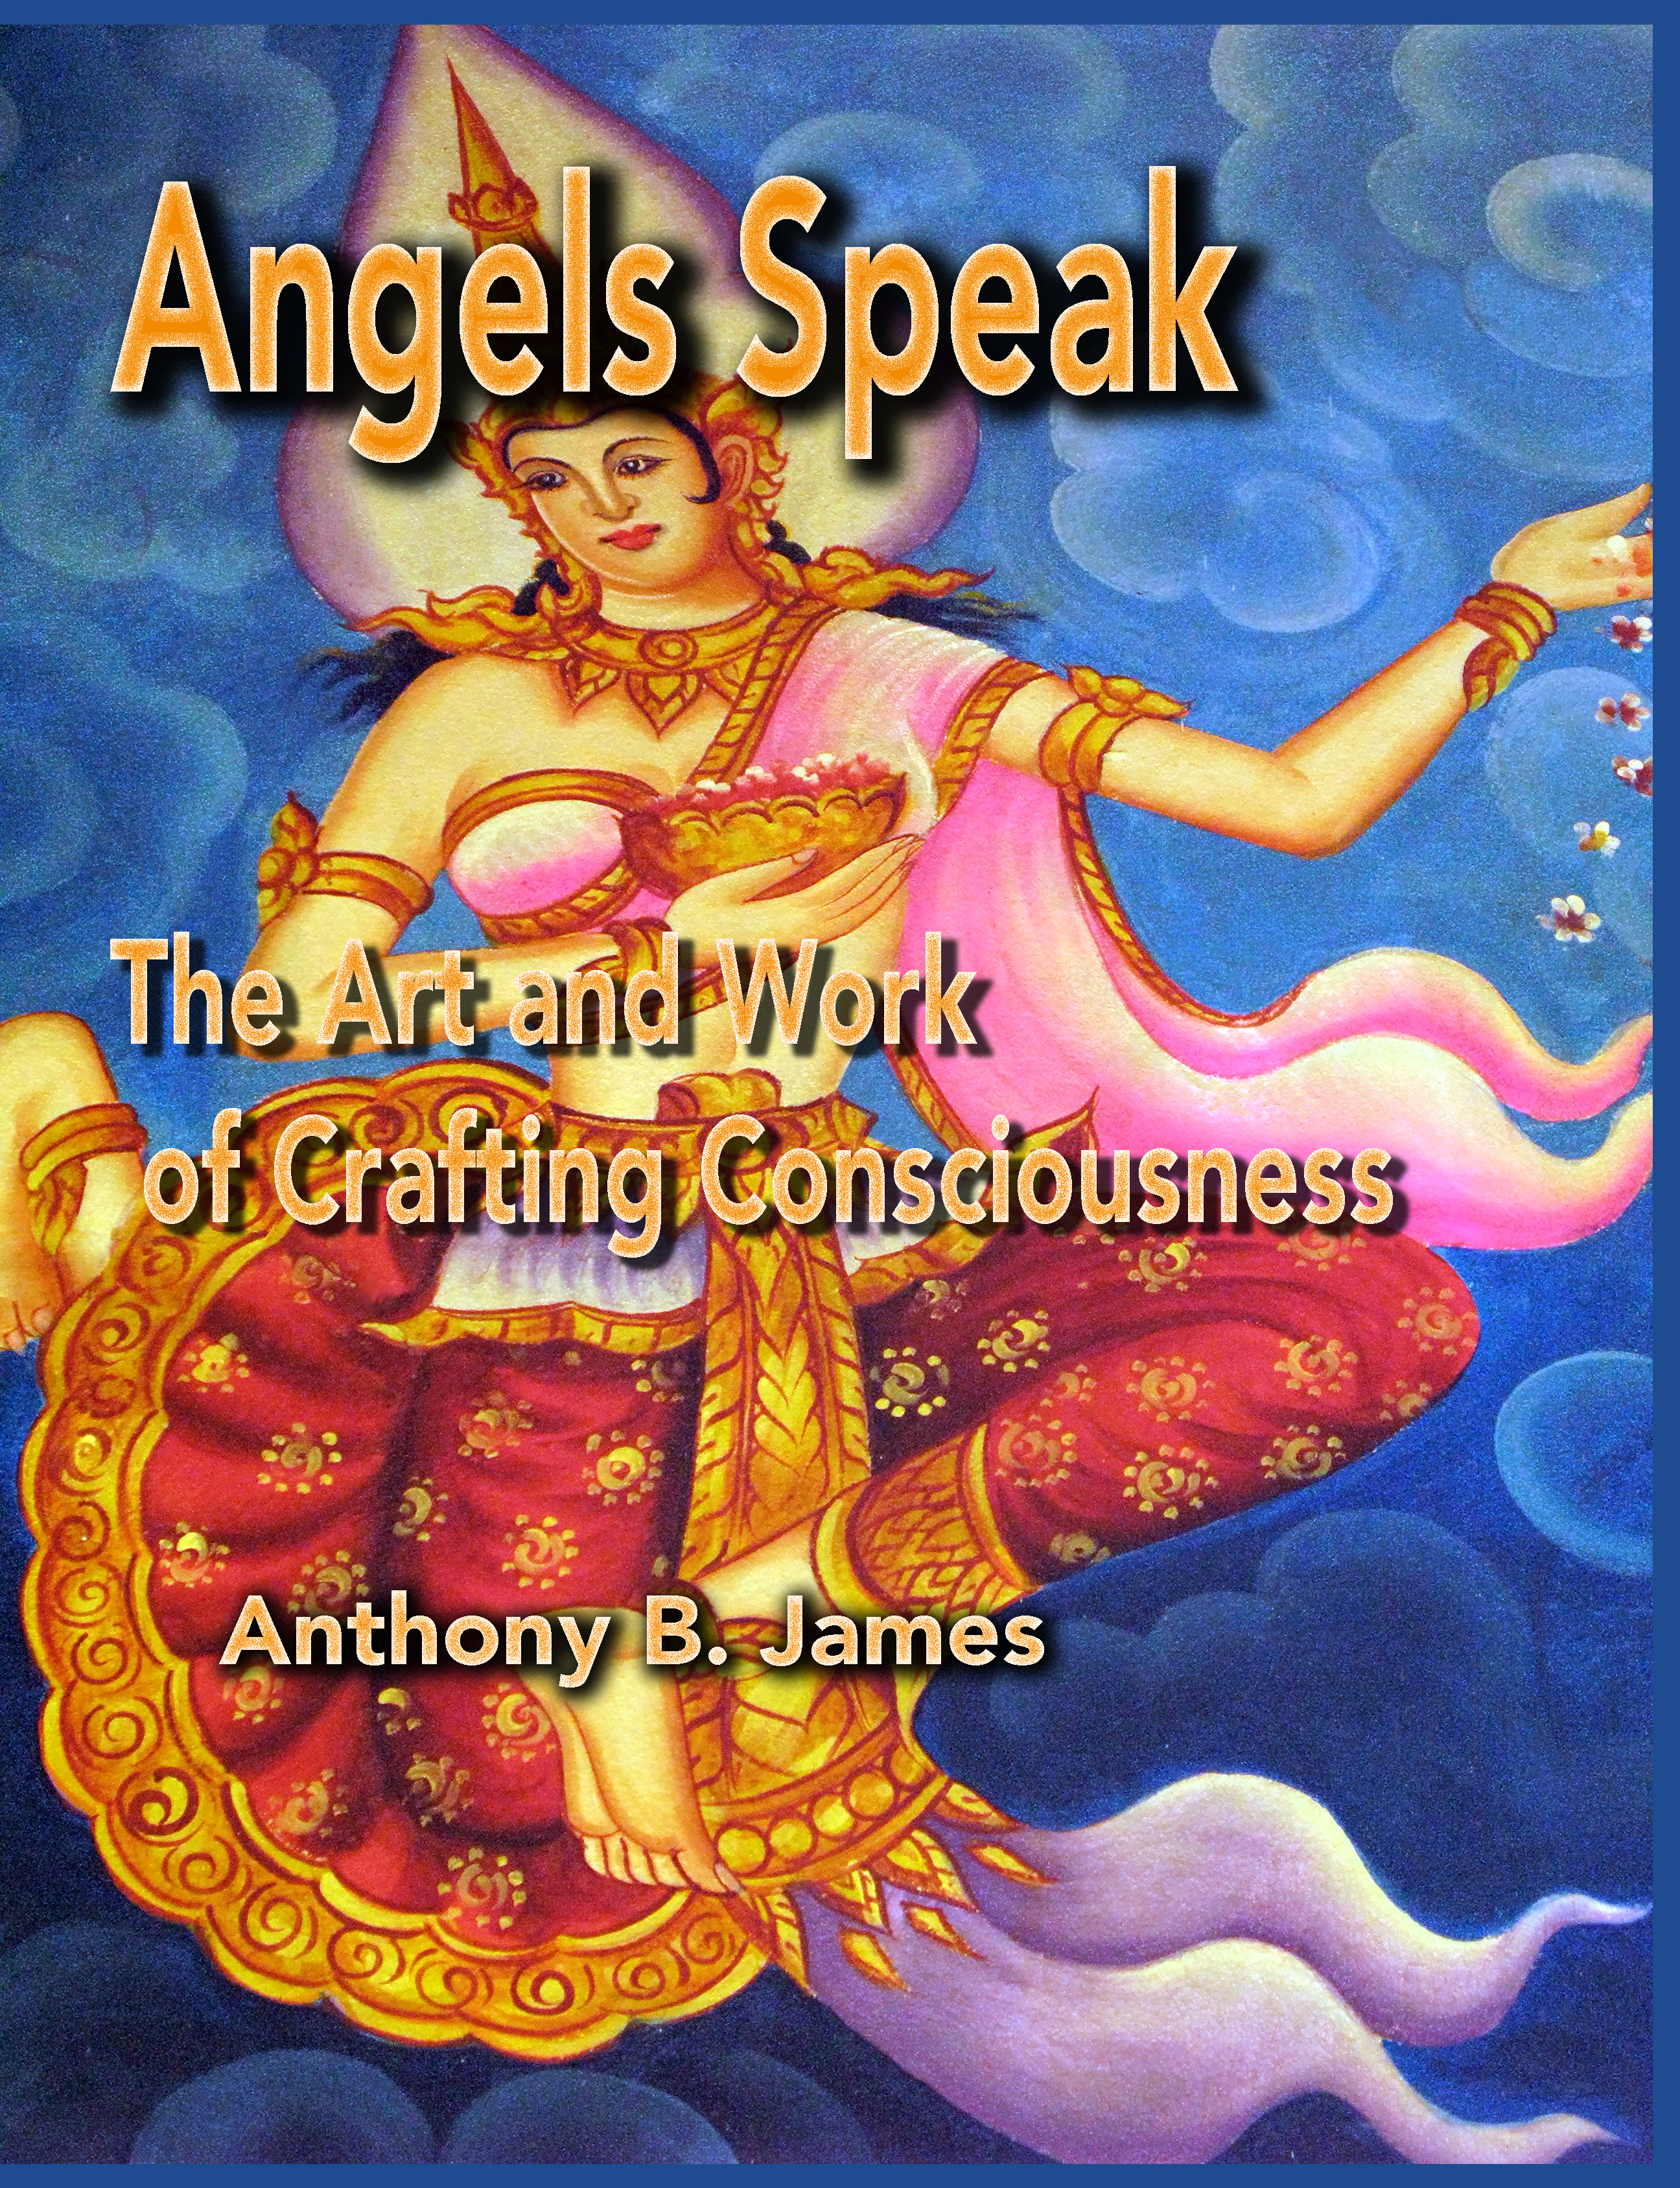 Angels Speak The Art and Work of Crafting Consciousness